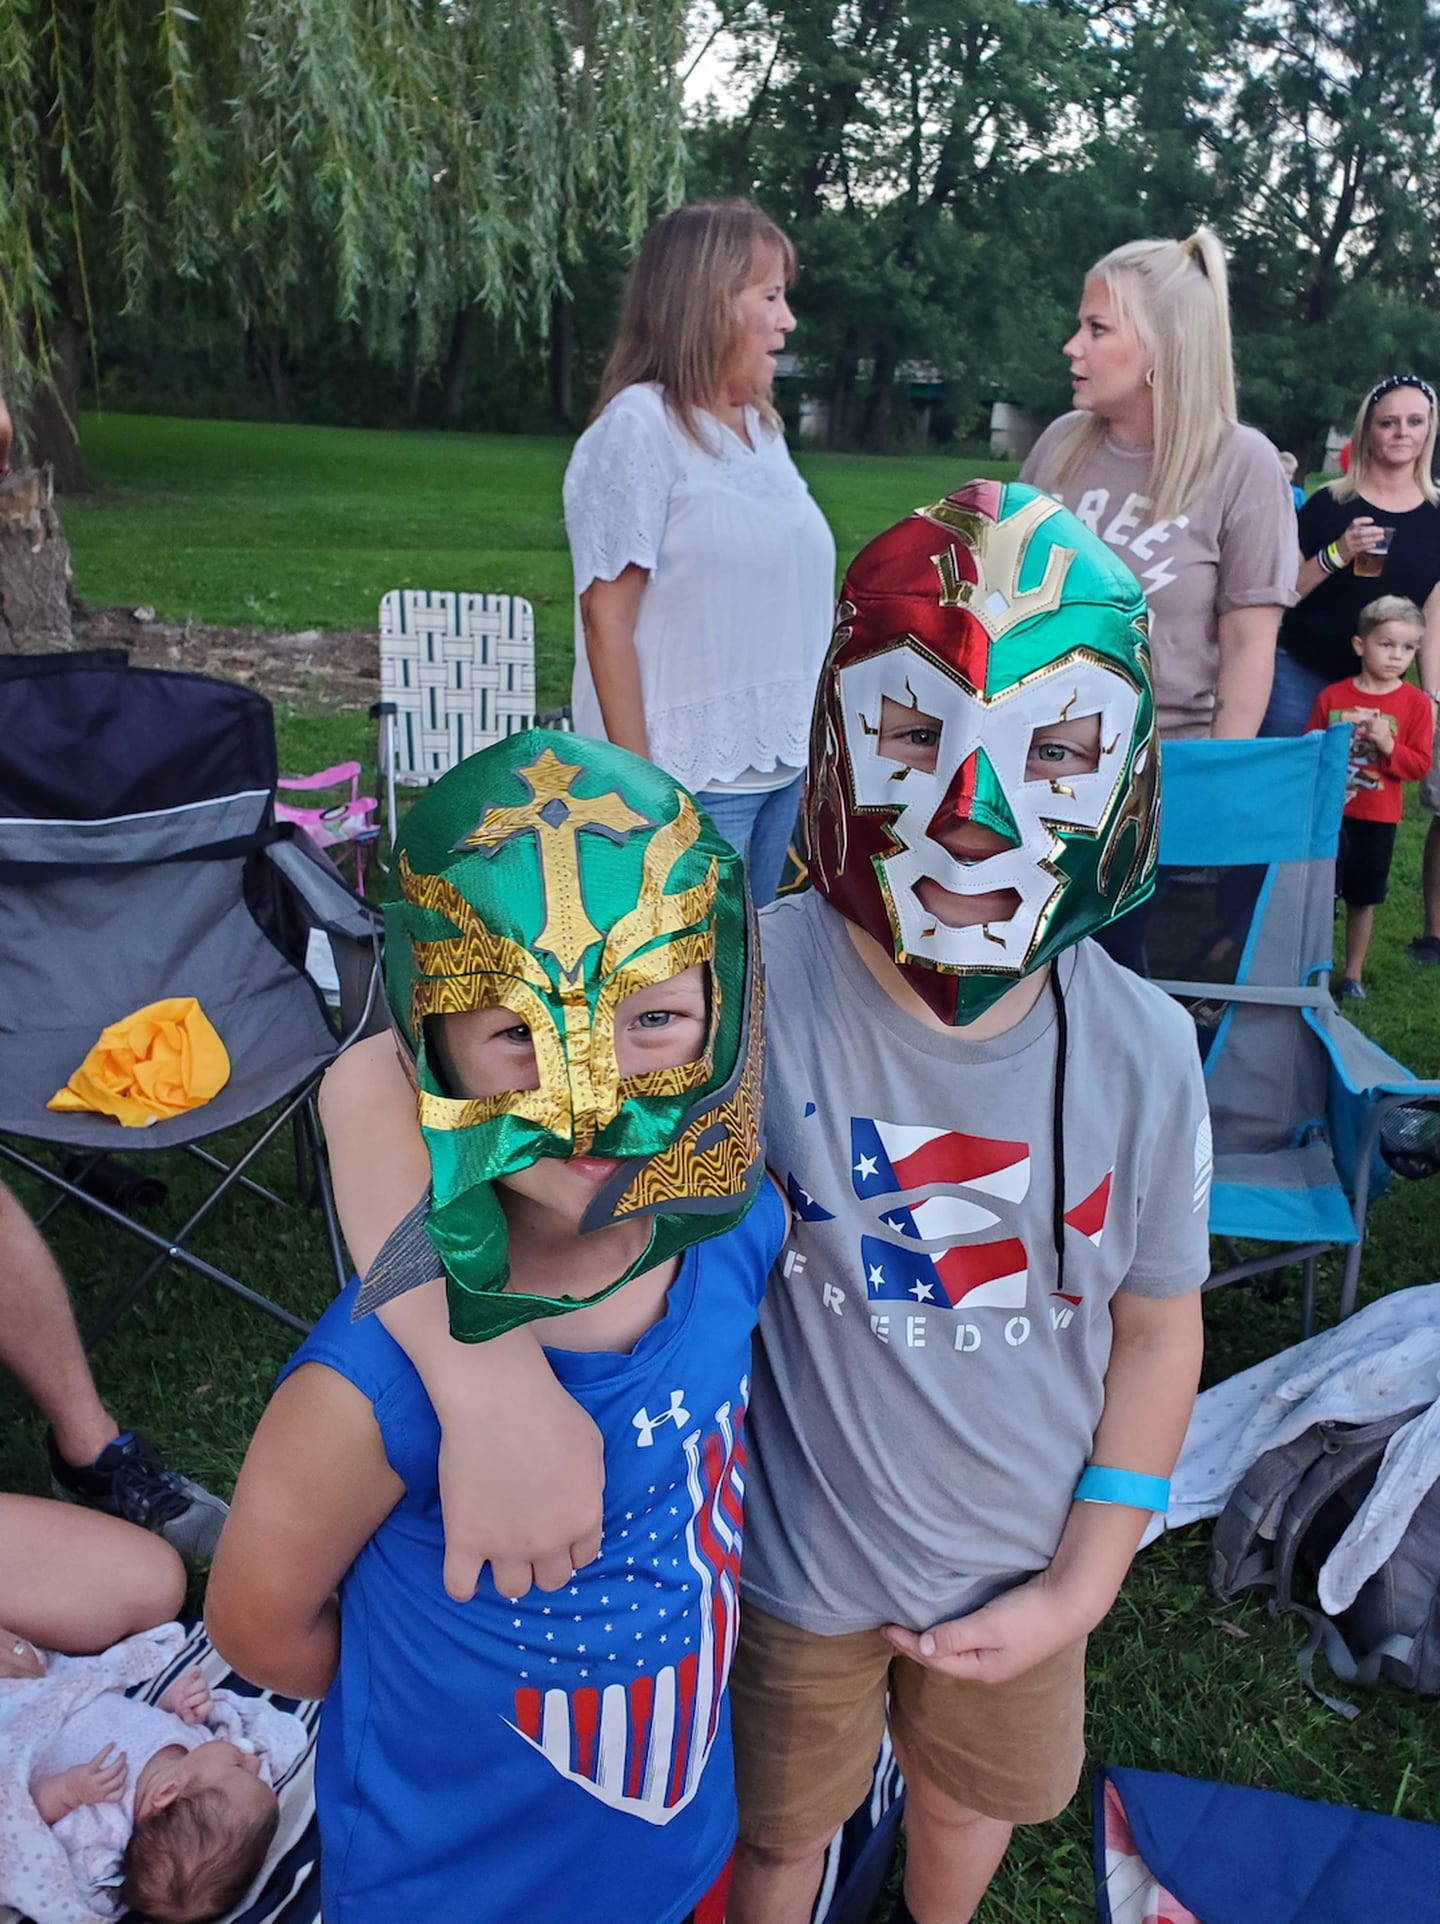 Genoa’s Volks Fest runs Friday, Sept. 8, 2023 through Sunday, Sept. 10, 2023 and is a weekend-long festival featuring Rumble on the River, Lucha Libre wrestling, a 6K and 10K Volksmarch, a Craft Beer & Wine Festival, Boy Scout Burrito Breakfast, Ducky Day’s Fun Fair sponsored by the Boy Scouts and the 20th annual Great Genoa Duck Race.